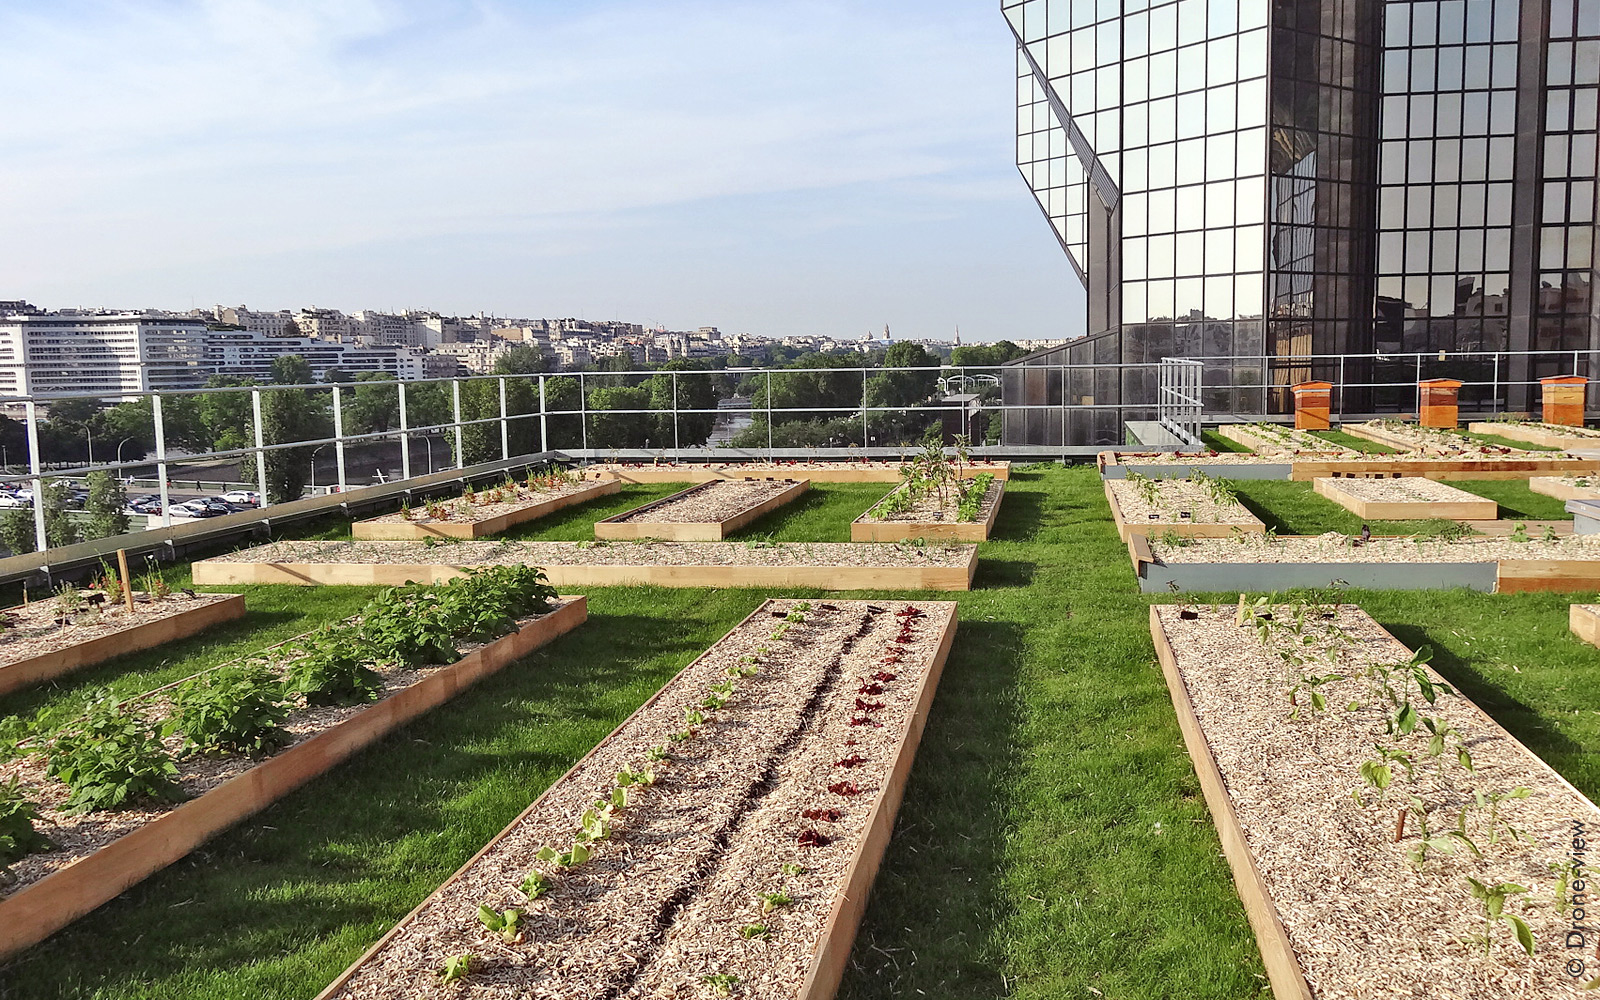 Vegetable planting beds and beehives on a roof in the city